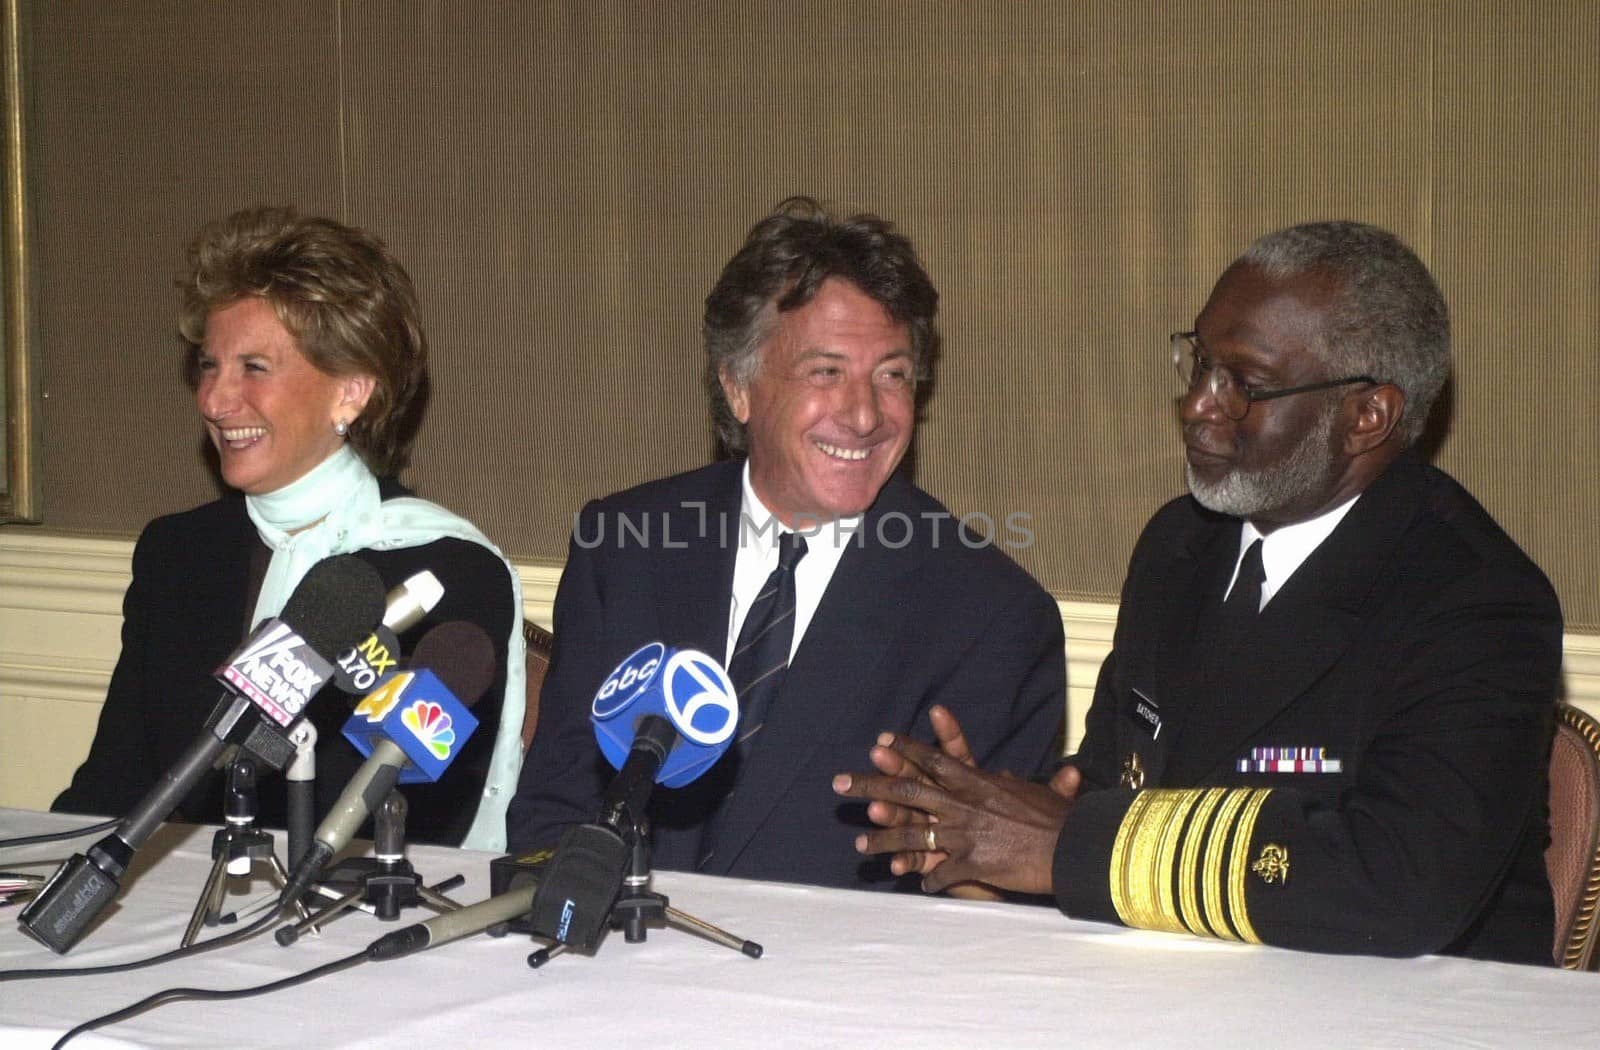 U.S. Ambassador Nancy Hirsch Rubin, Dustin Hoffman and U.S. Surgeon General Davis Satcher at the "Erasing The Stigma" presentation of awards to members of the media who have provided accurate portrayals of mental illness. 04-28-00